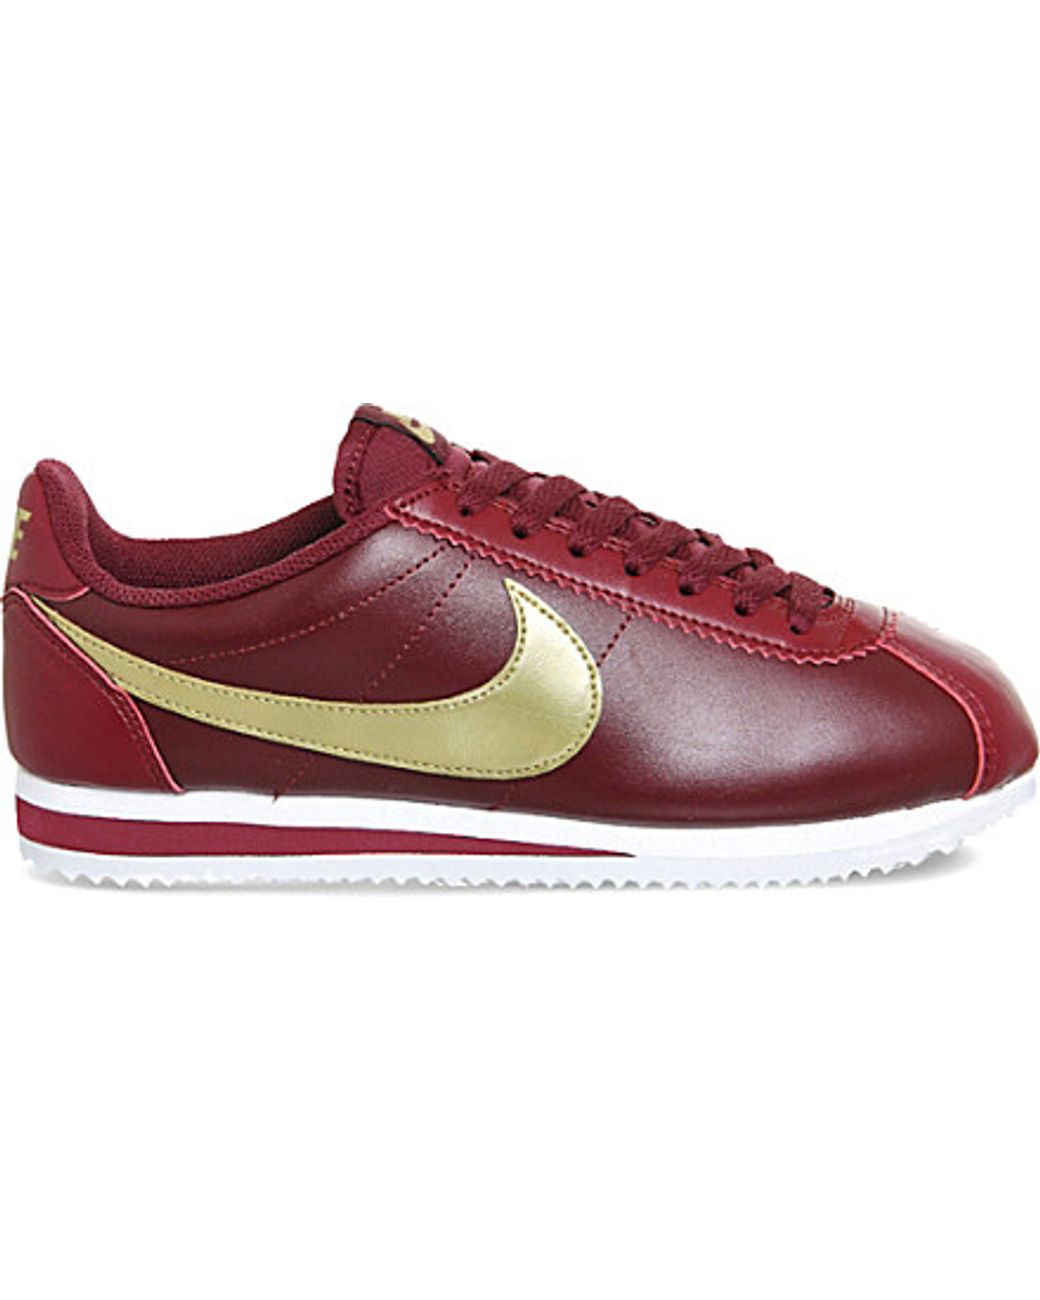 Size+9.5+-+Nike+Classic+Cortez+Metallic+Red+Bronze+2015 for sale online